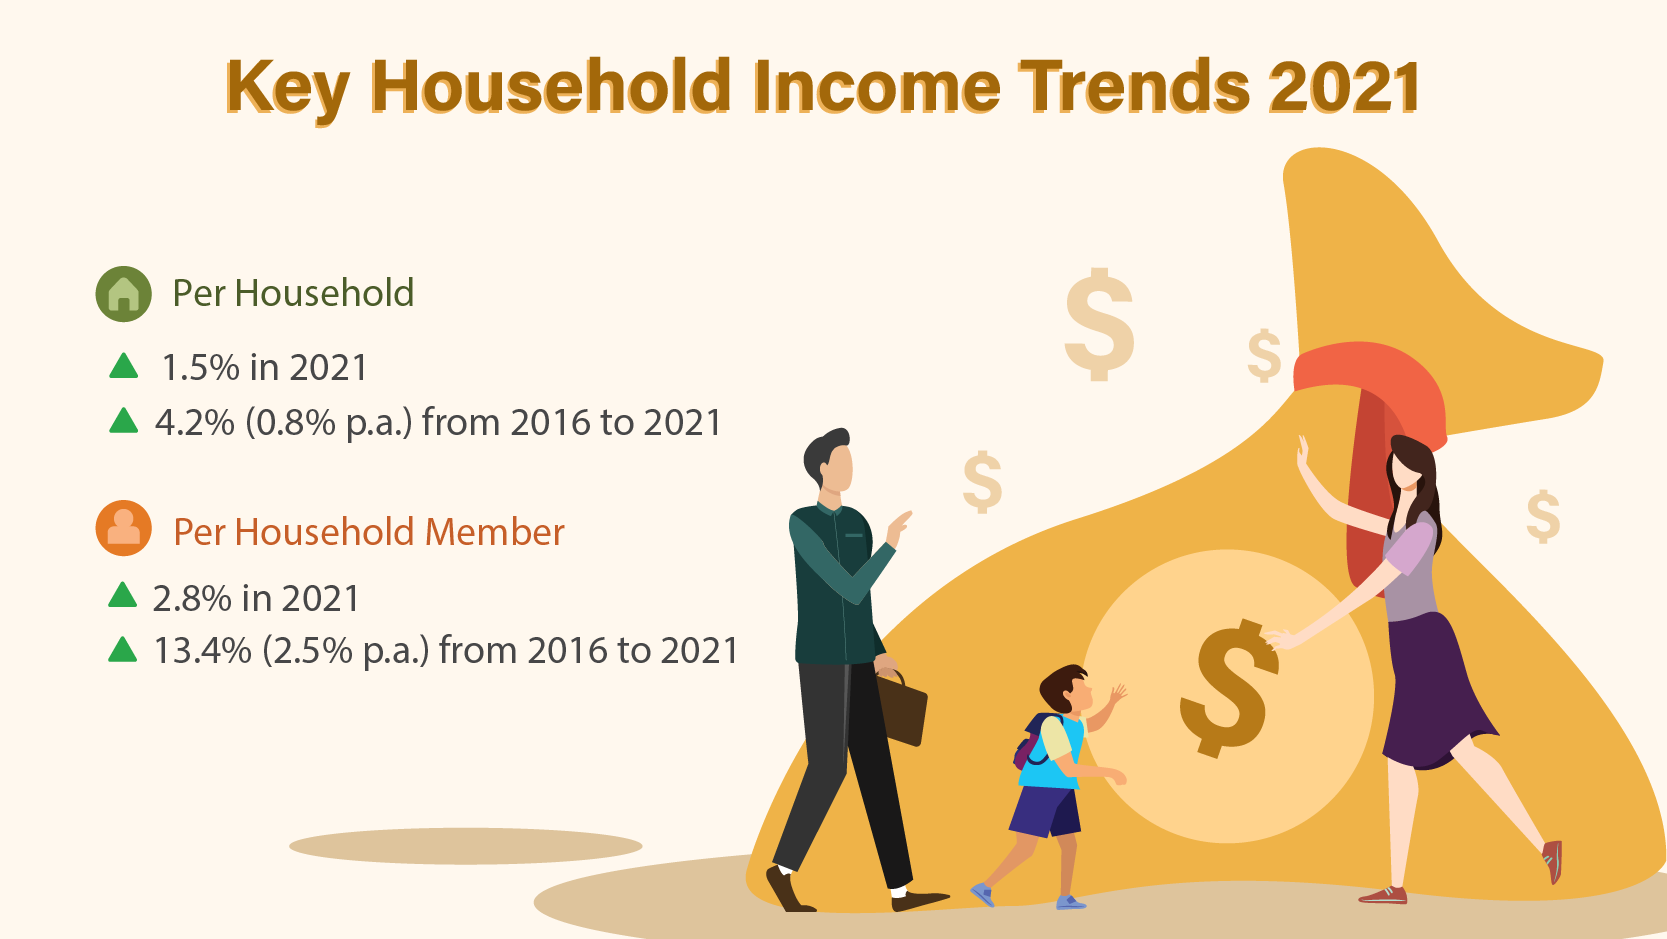 Key Household Income Trends 2021